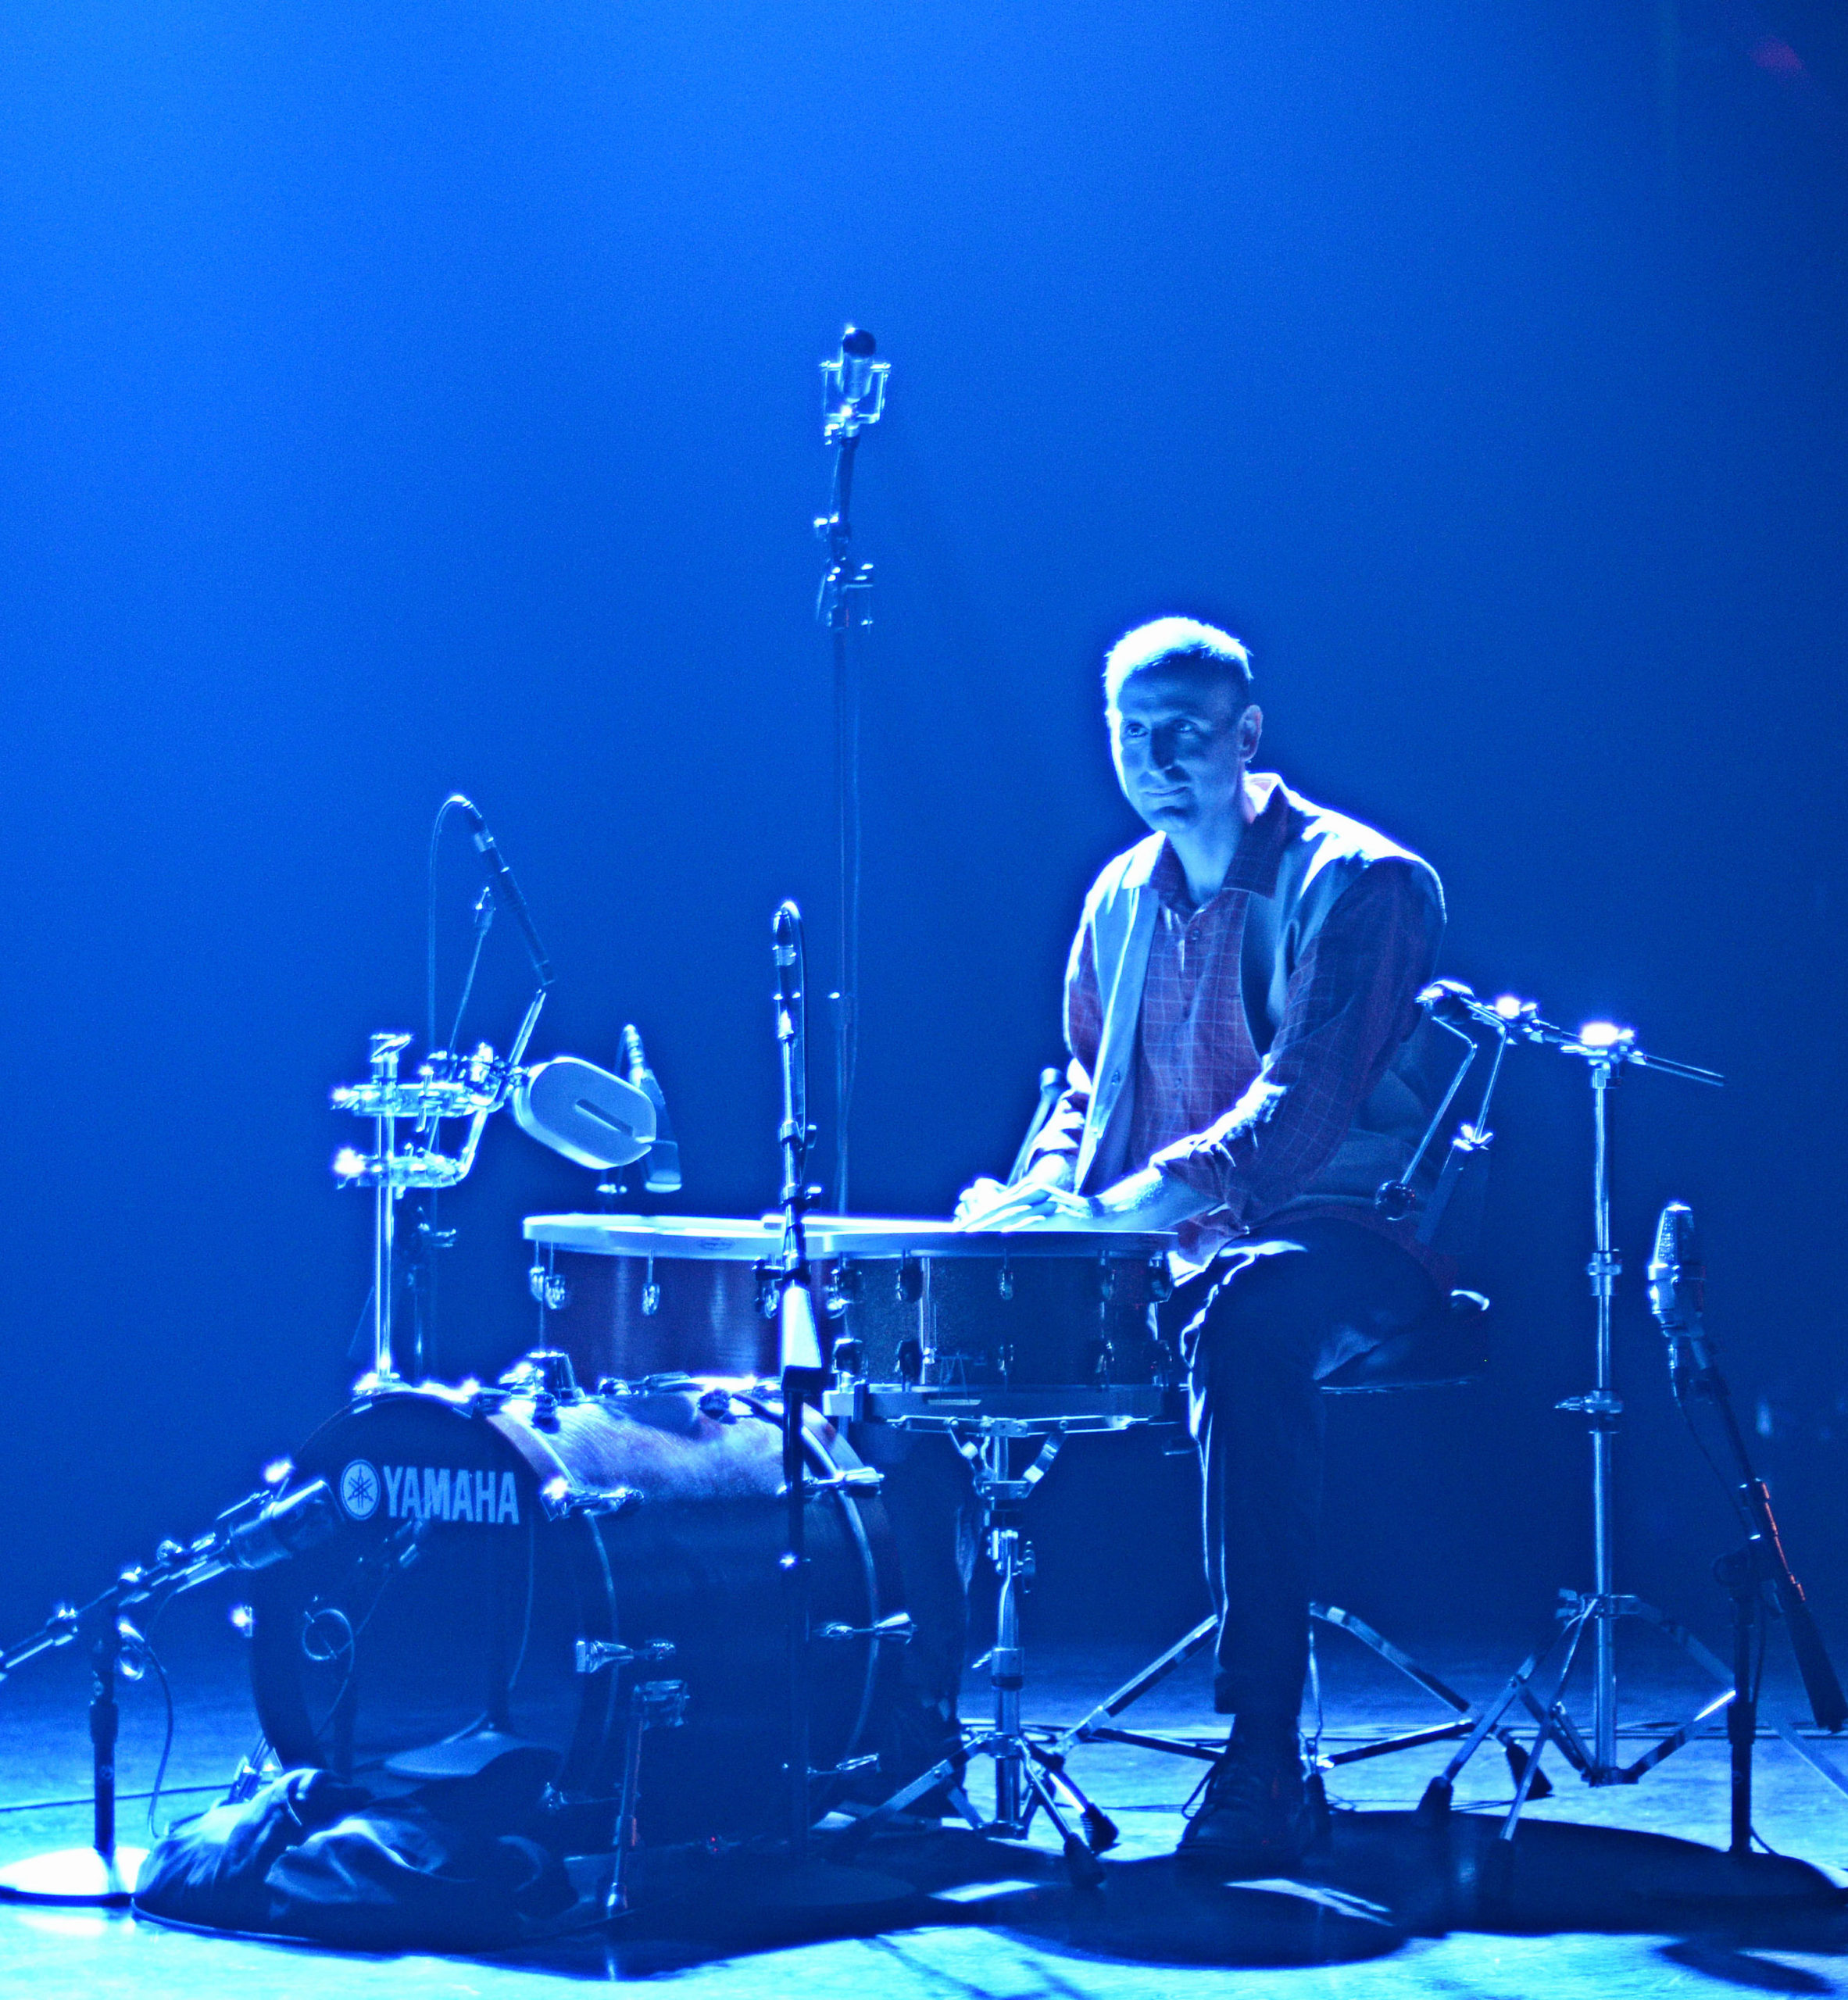 Michael Gould sitting at a drum kit bathed in blue light.